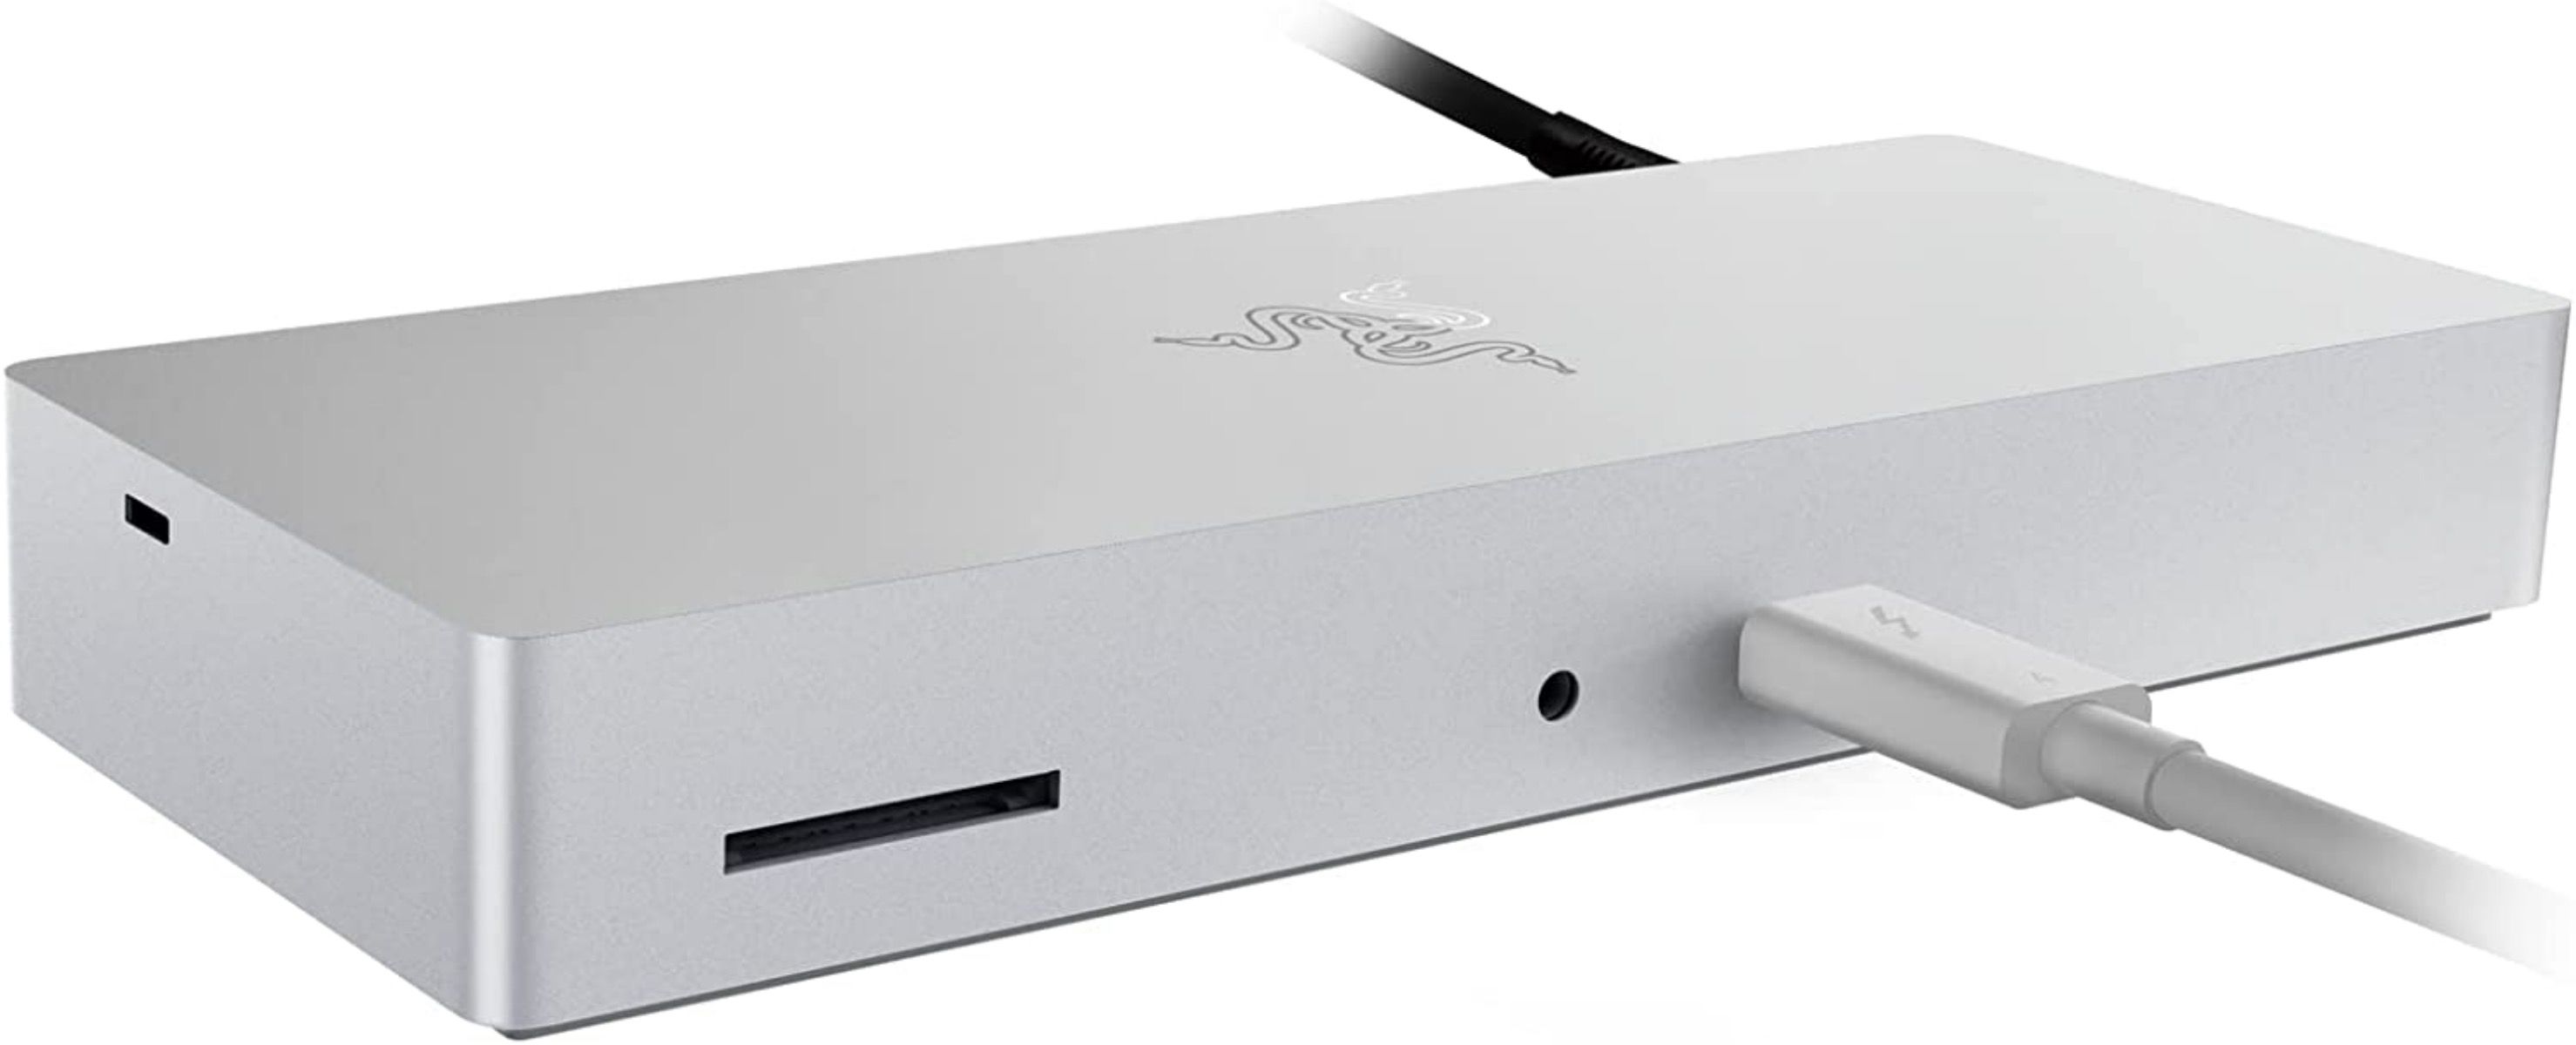 Image of white Razer Thunderbolt 4 Dock for Mac with USB connector plugged in